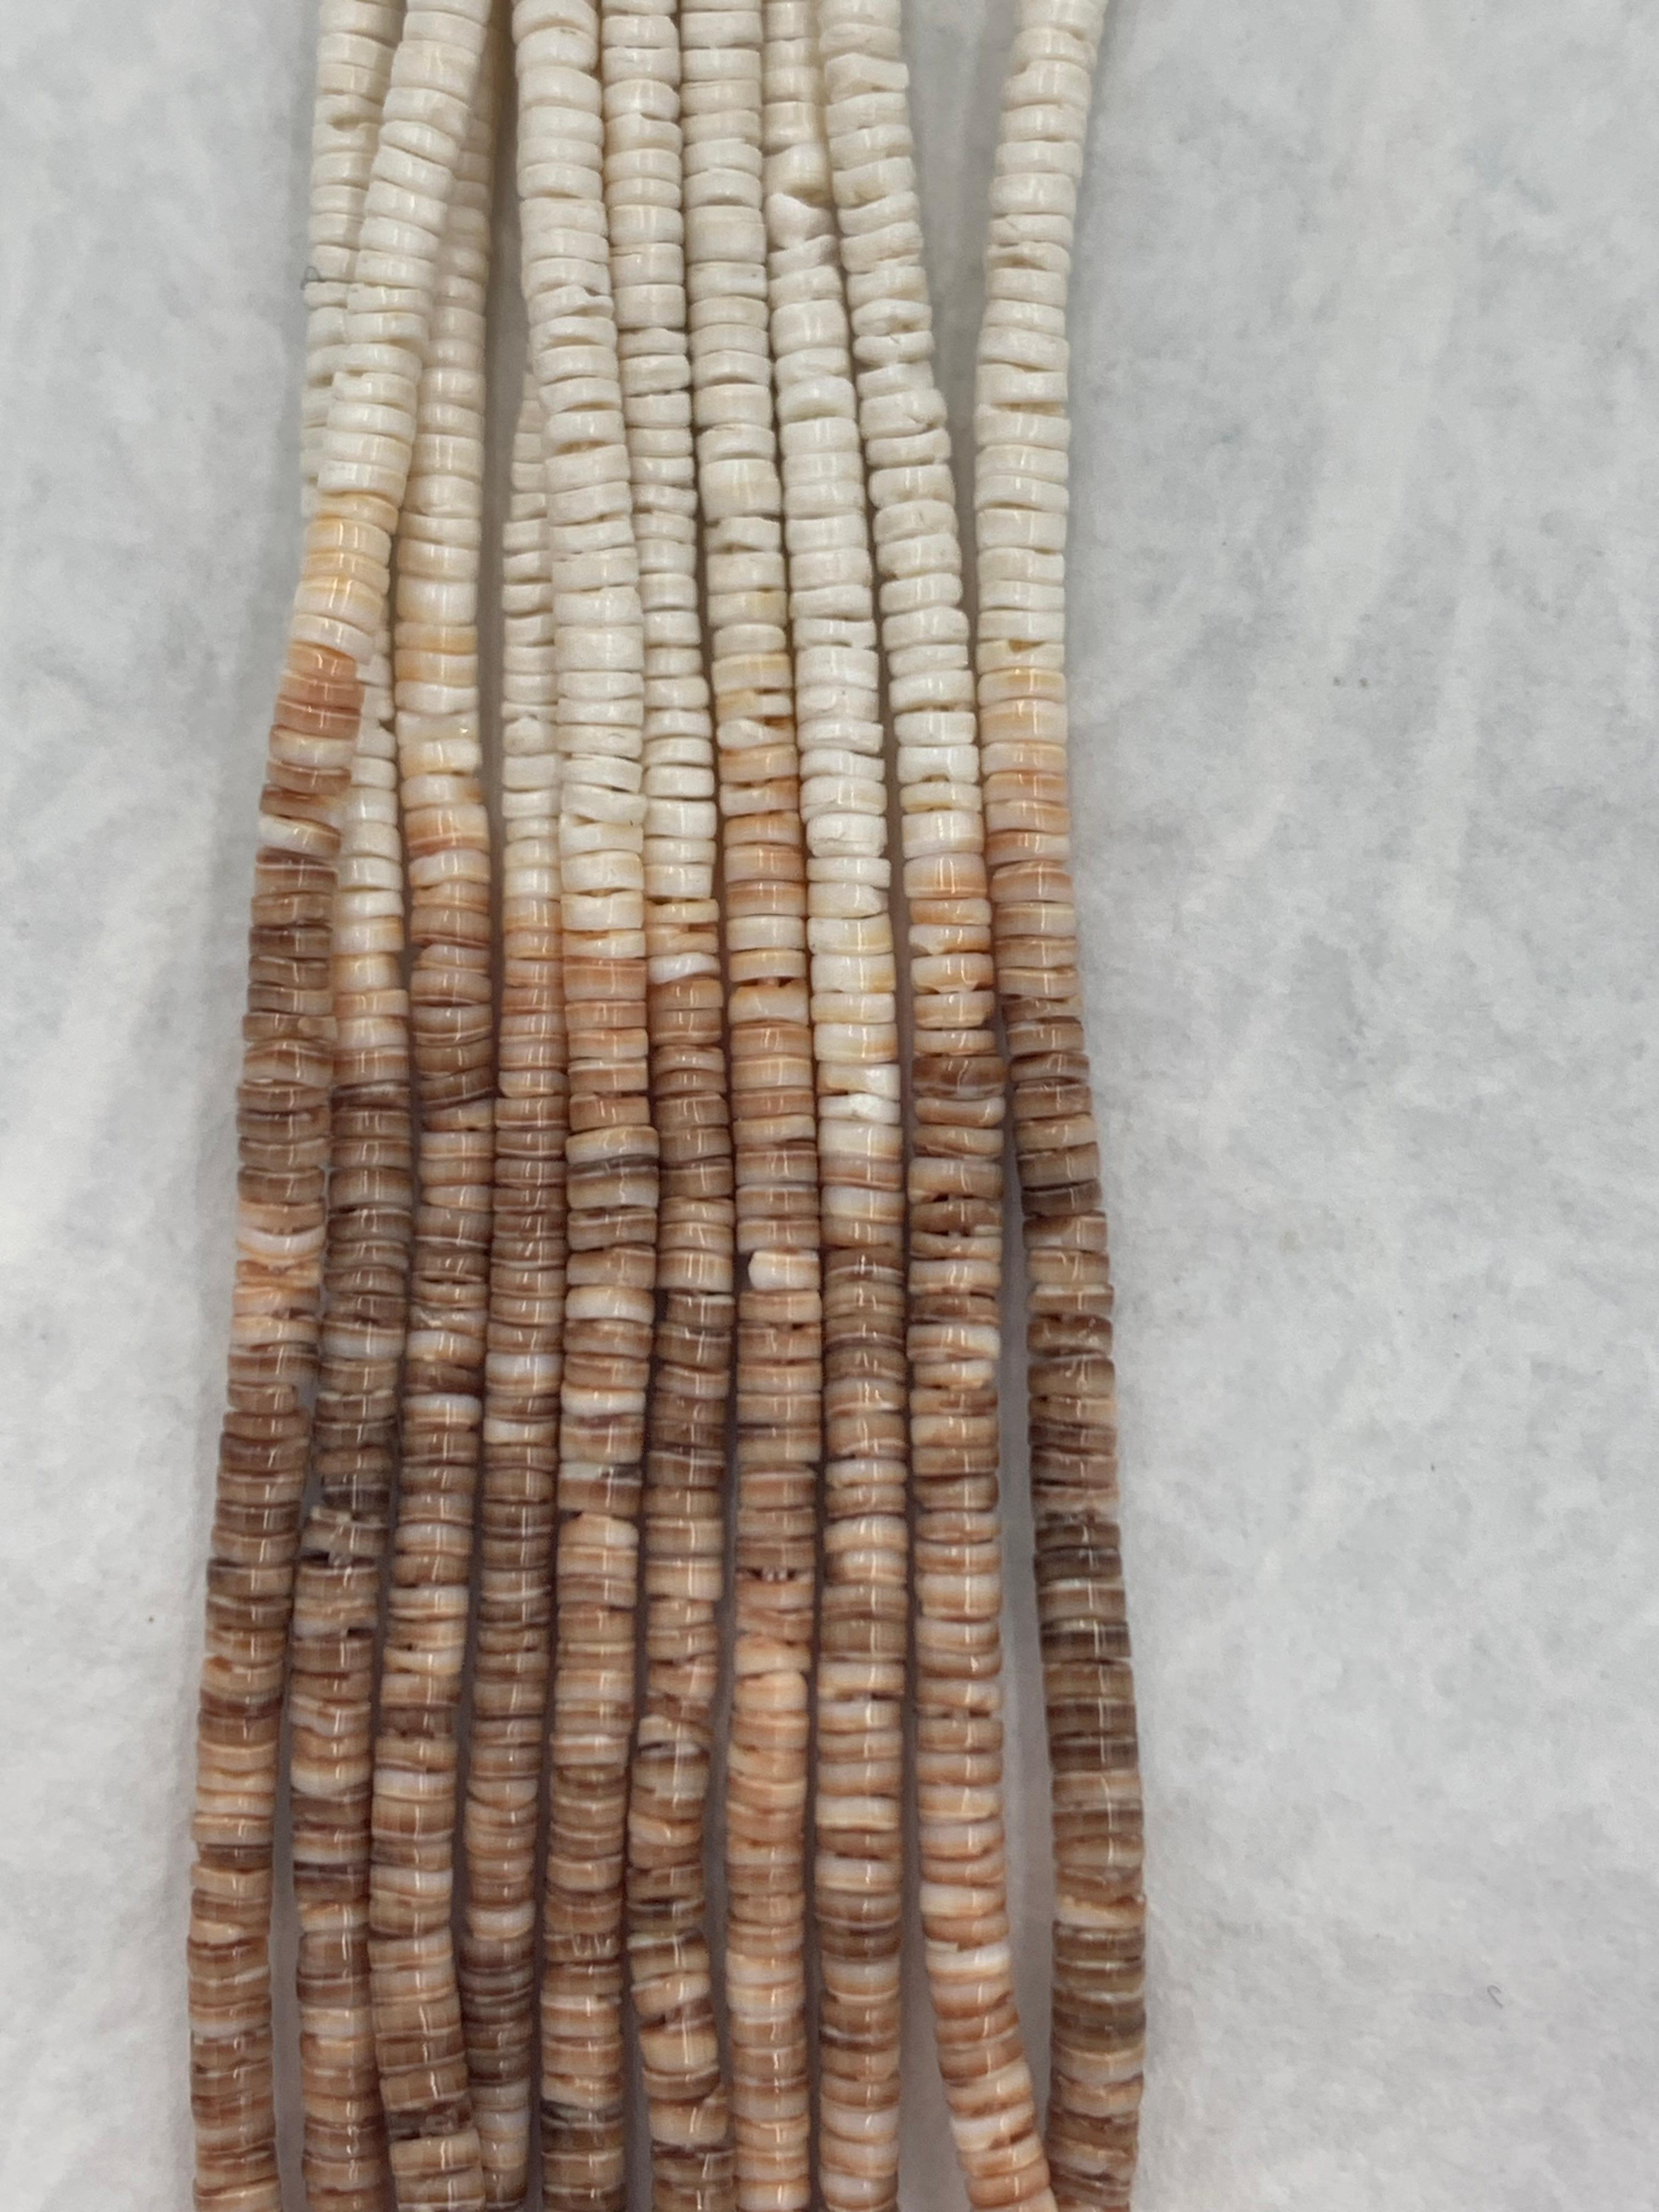 Santo Domingo Pueblo hand made necklace with ten strands of fresh water white and brown ombre shell heishi shells. The heishi beautifully graduates in color from dark brown going to light brown tan and finishing with a marvelous light tan white